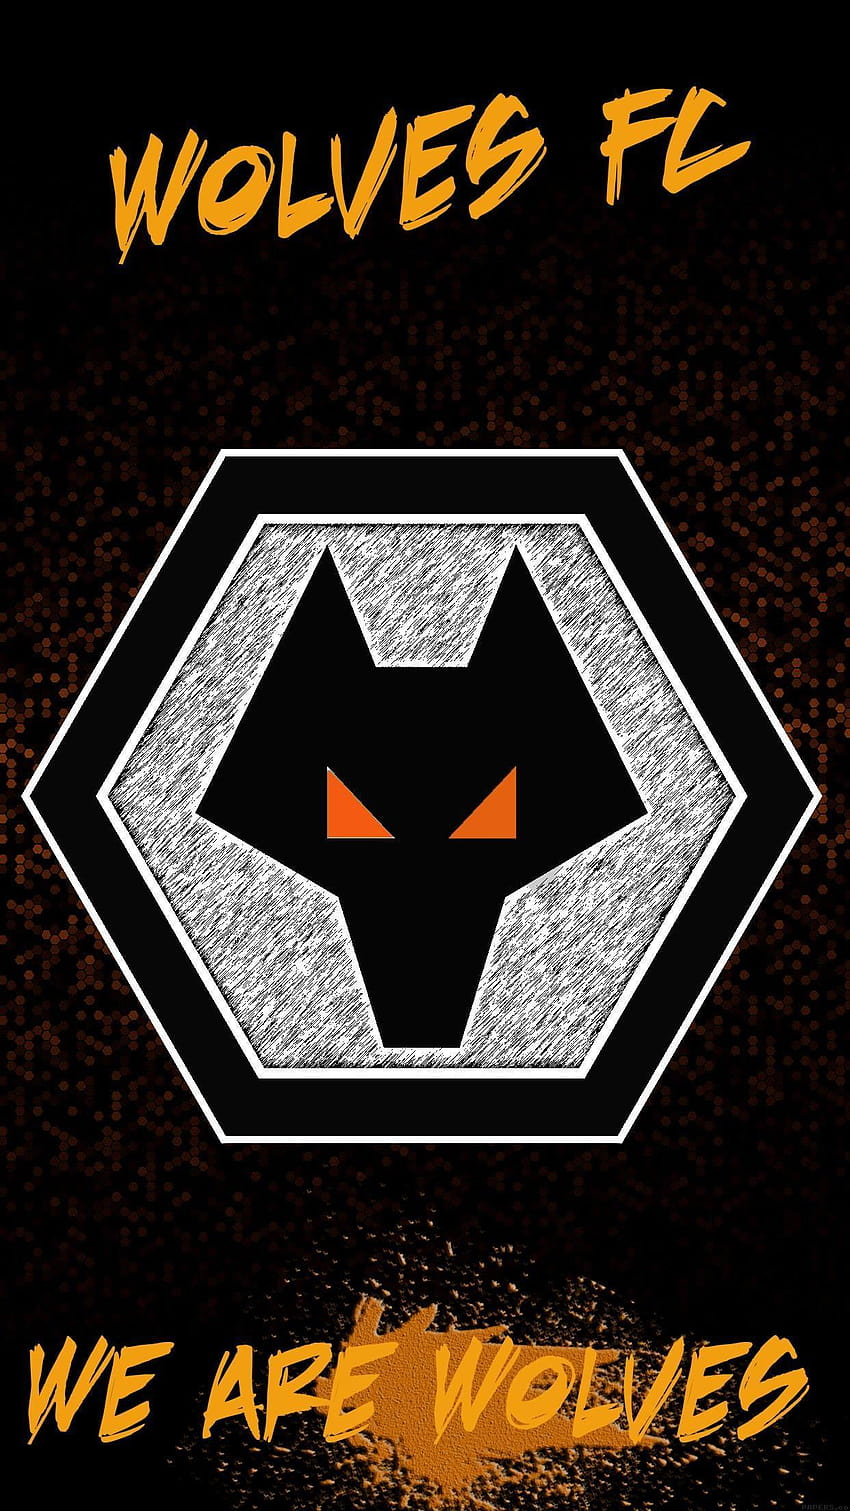 Wolves FC for Android, wolverhampton android HD phone wallpaper